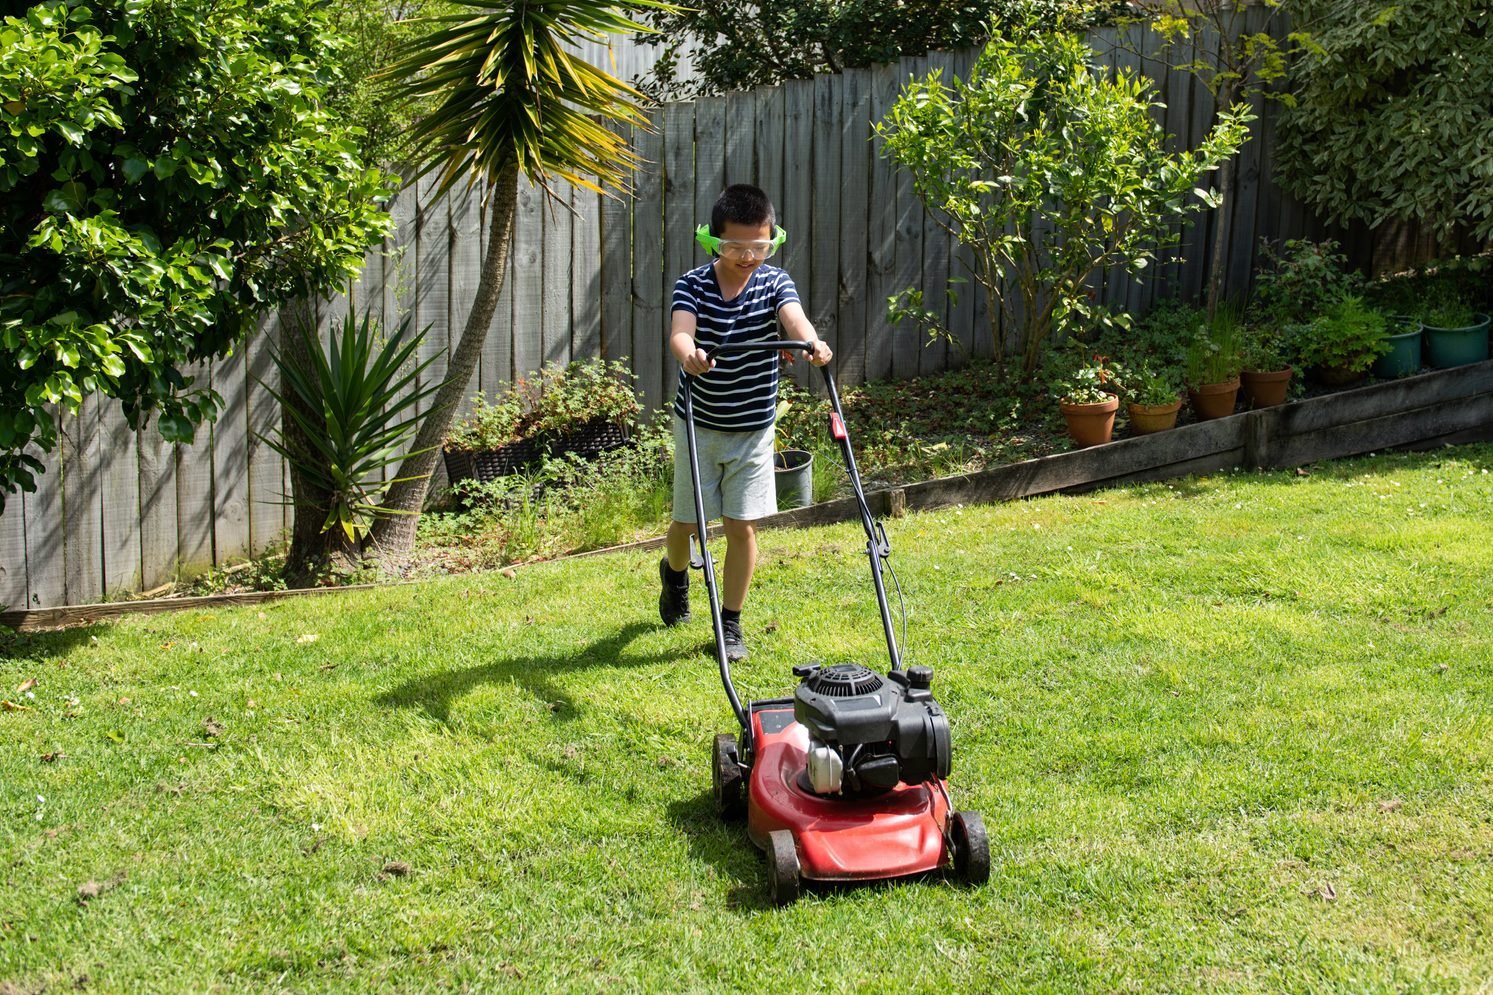 When Should You Let Your Child Mow the Lawn?